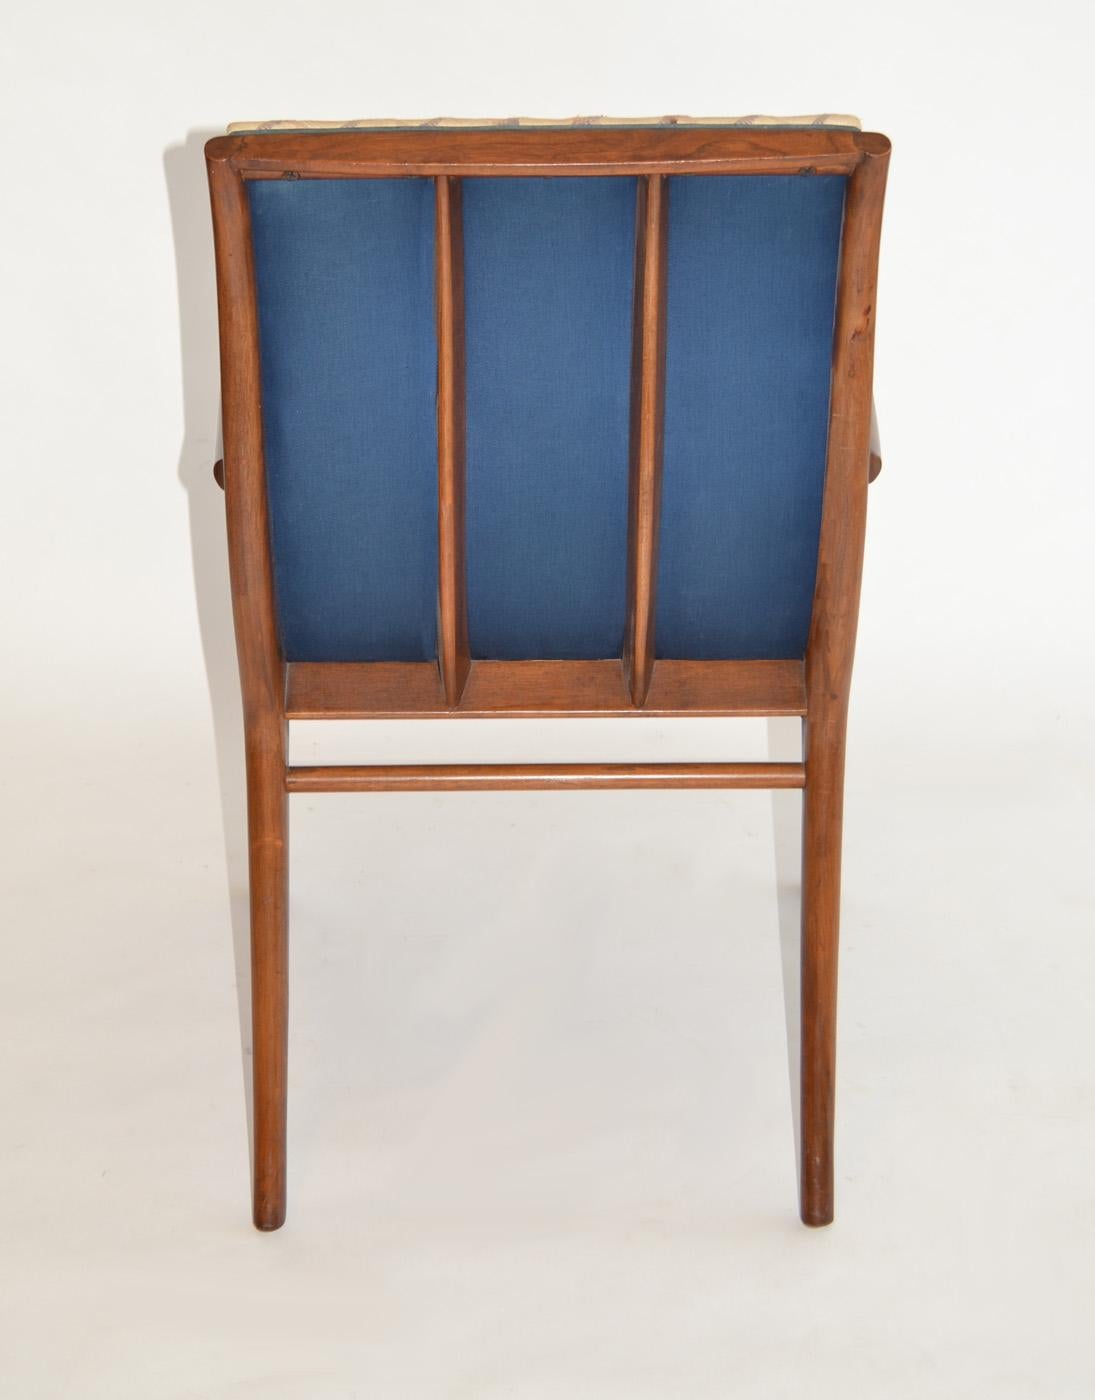 American Set of Six Saber Leg Dining Chairs by T.H. Robsjohn-Gibbings for Widdicomb